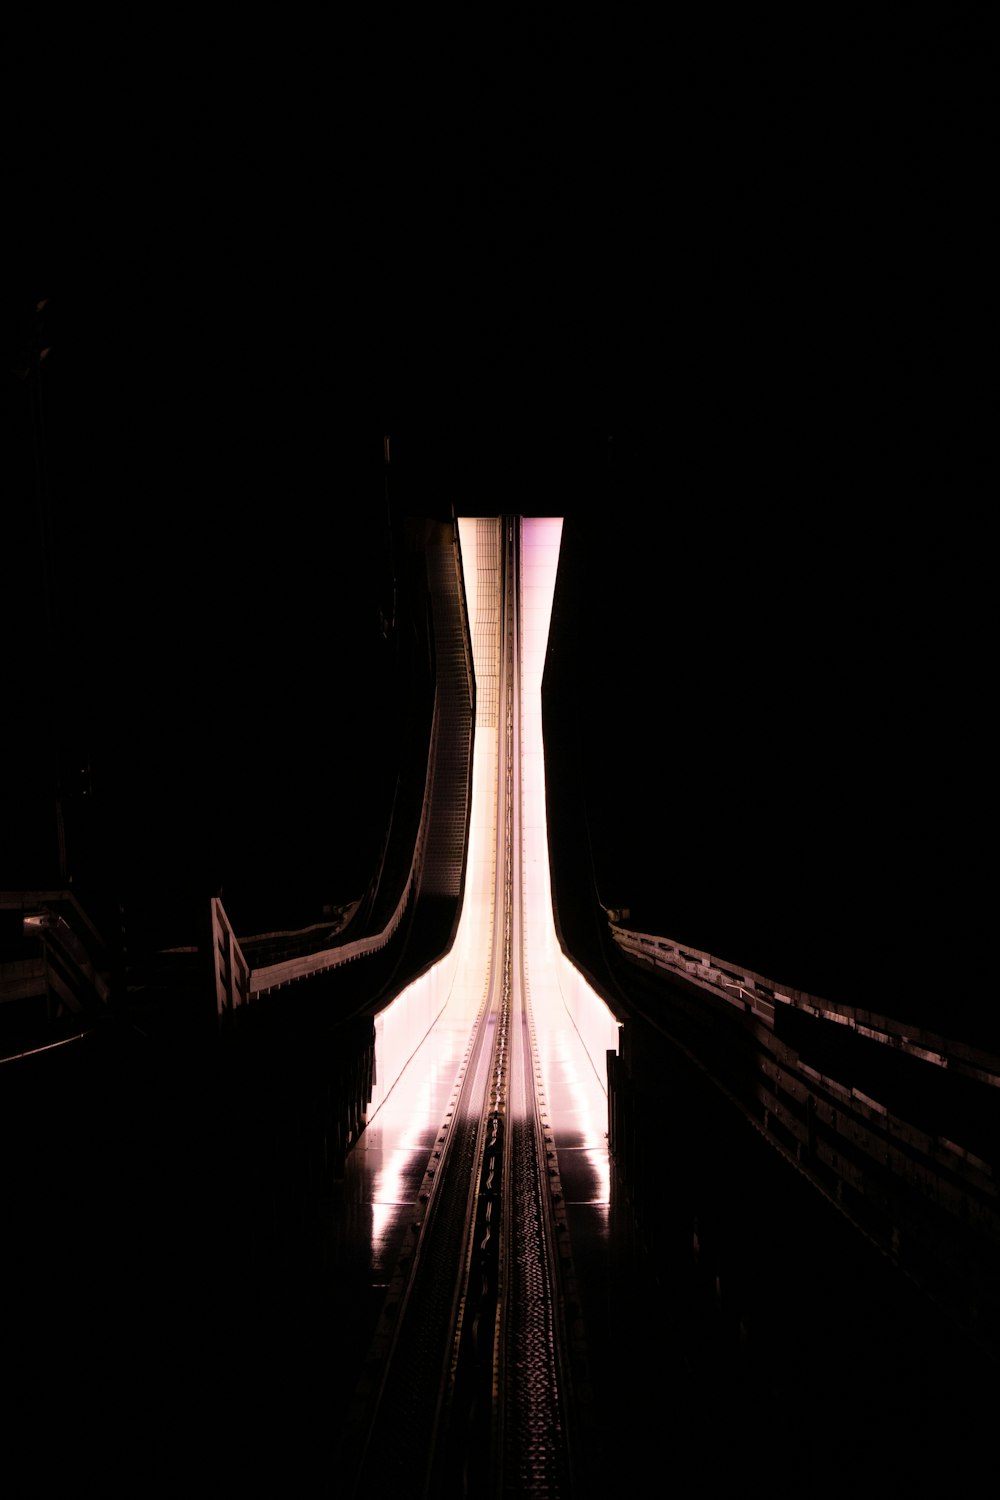 a train traveling through a tunnel in the dark